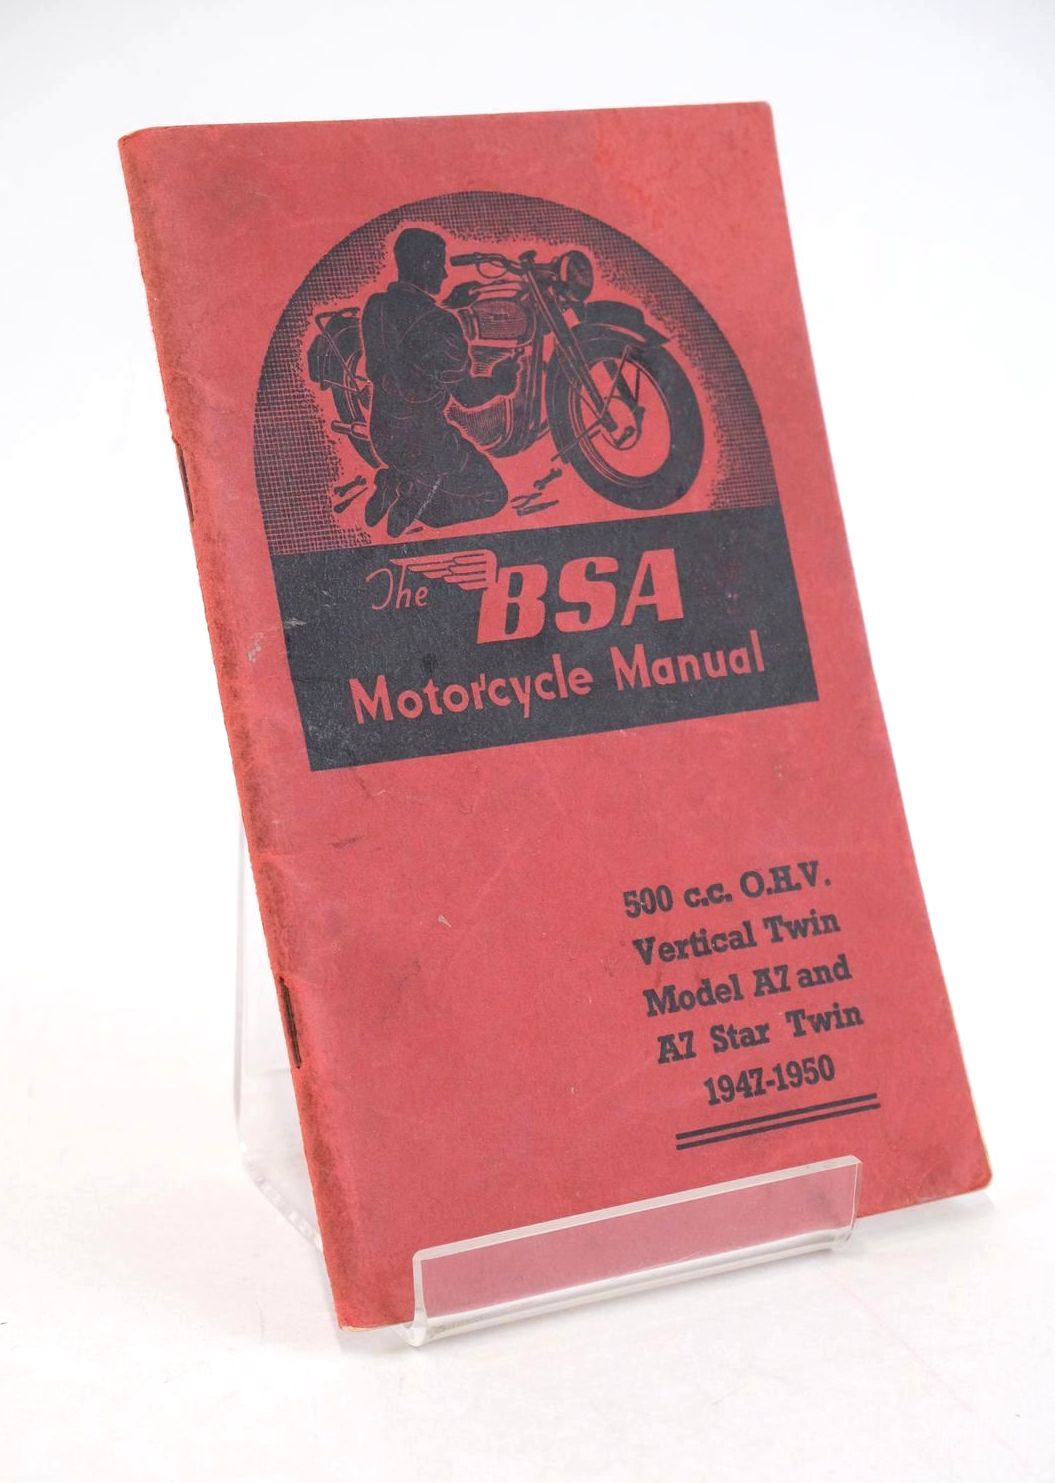 Photo of THE BSA MOTORCYCLE MANUAL: 500 C.C. O.H.V. VERTICAL TWIN MODEL A7 AND A7 STAR TWIN 1947-1950 published by B.S.A. Motor Cycles Ltd. (STOCK CODE: 1327782)  for sale by Stella & Rose's Books